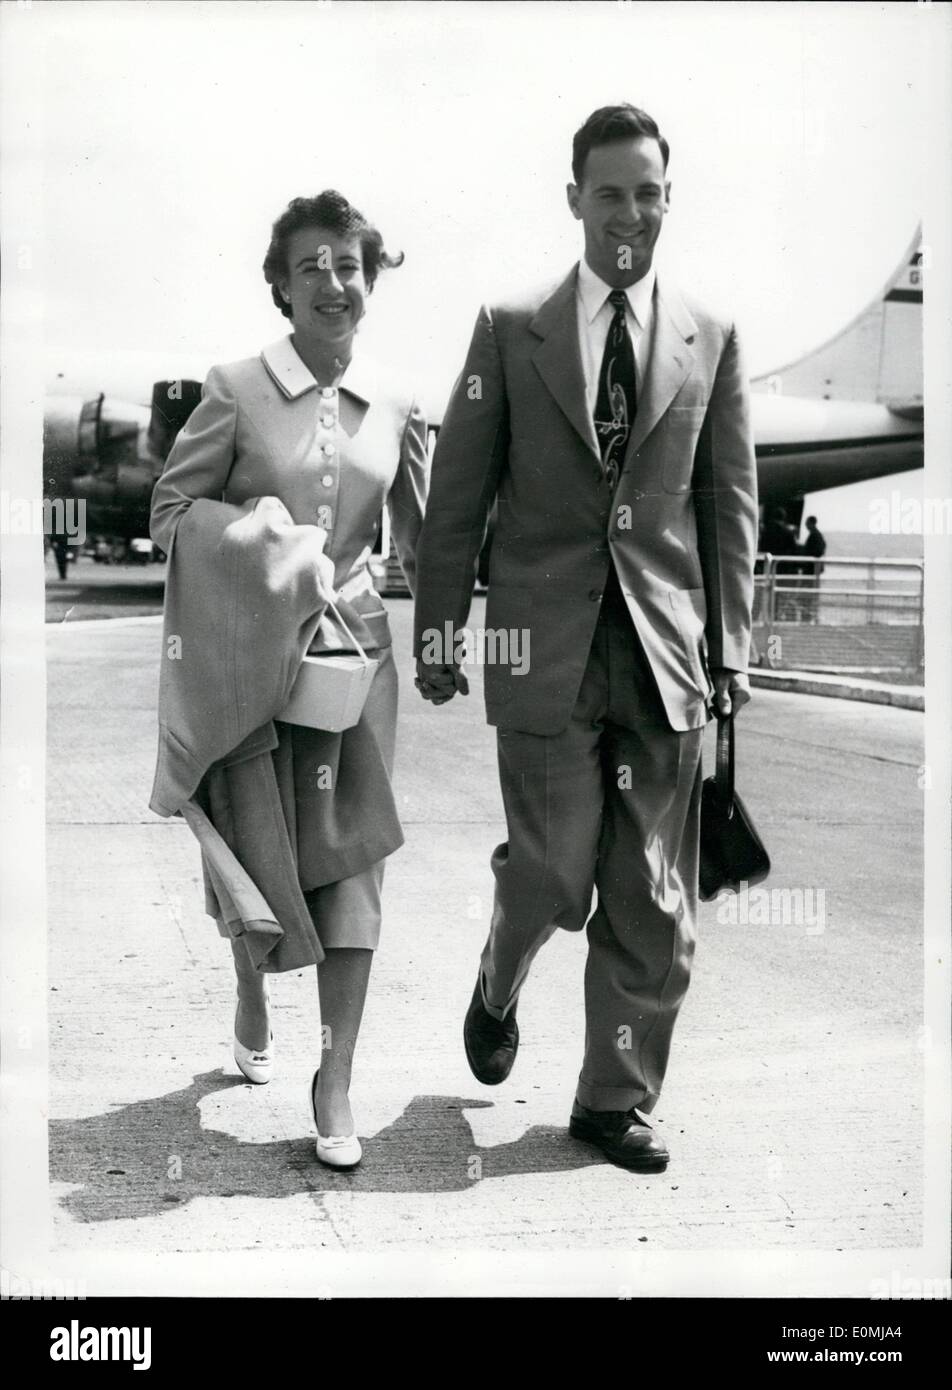 Jun. 06, 1955 - Maureen Connolly arrives in London on honeymoon. Hand-in-Hand.: Maureen Connolly the young American World Tennis Champion-and her husband of four days- Norman Brinker- American Olympic Horseman arrived at London report on the Wimbledon Championships. She isnot defending her title.Photo shows Maureen Connolly and husband Norman Brinker walk away from the aircraft hand-in hand on their arrival at London Airport this morning Stock Photo